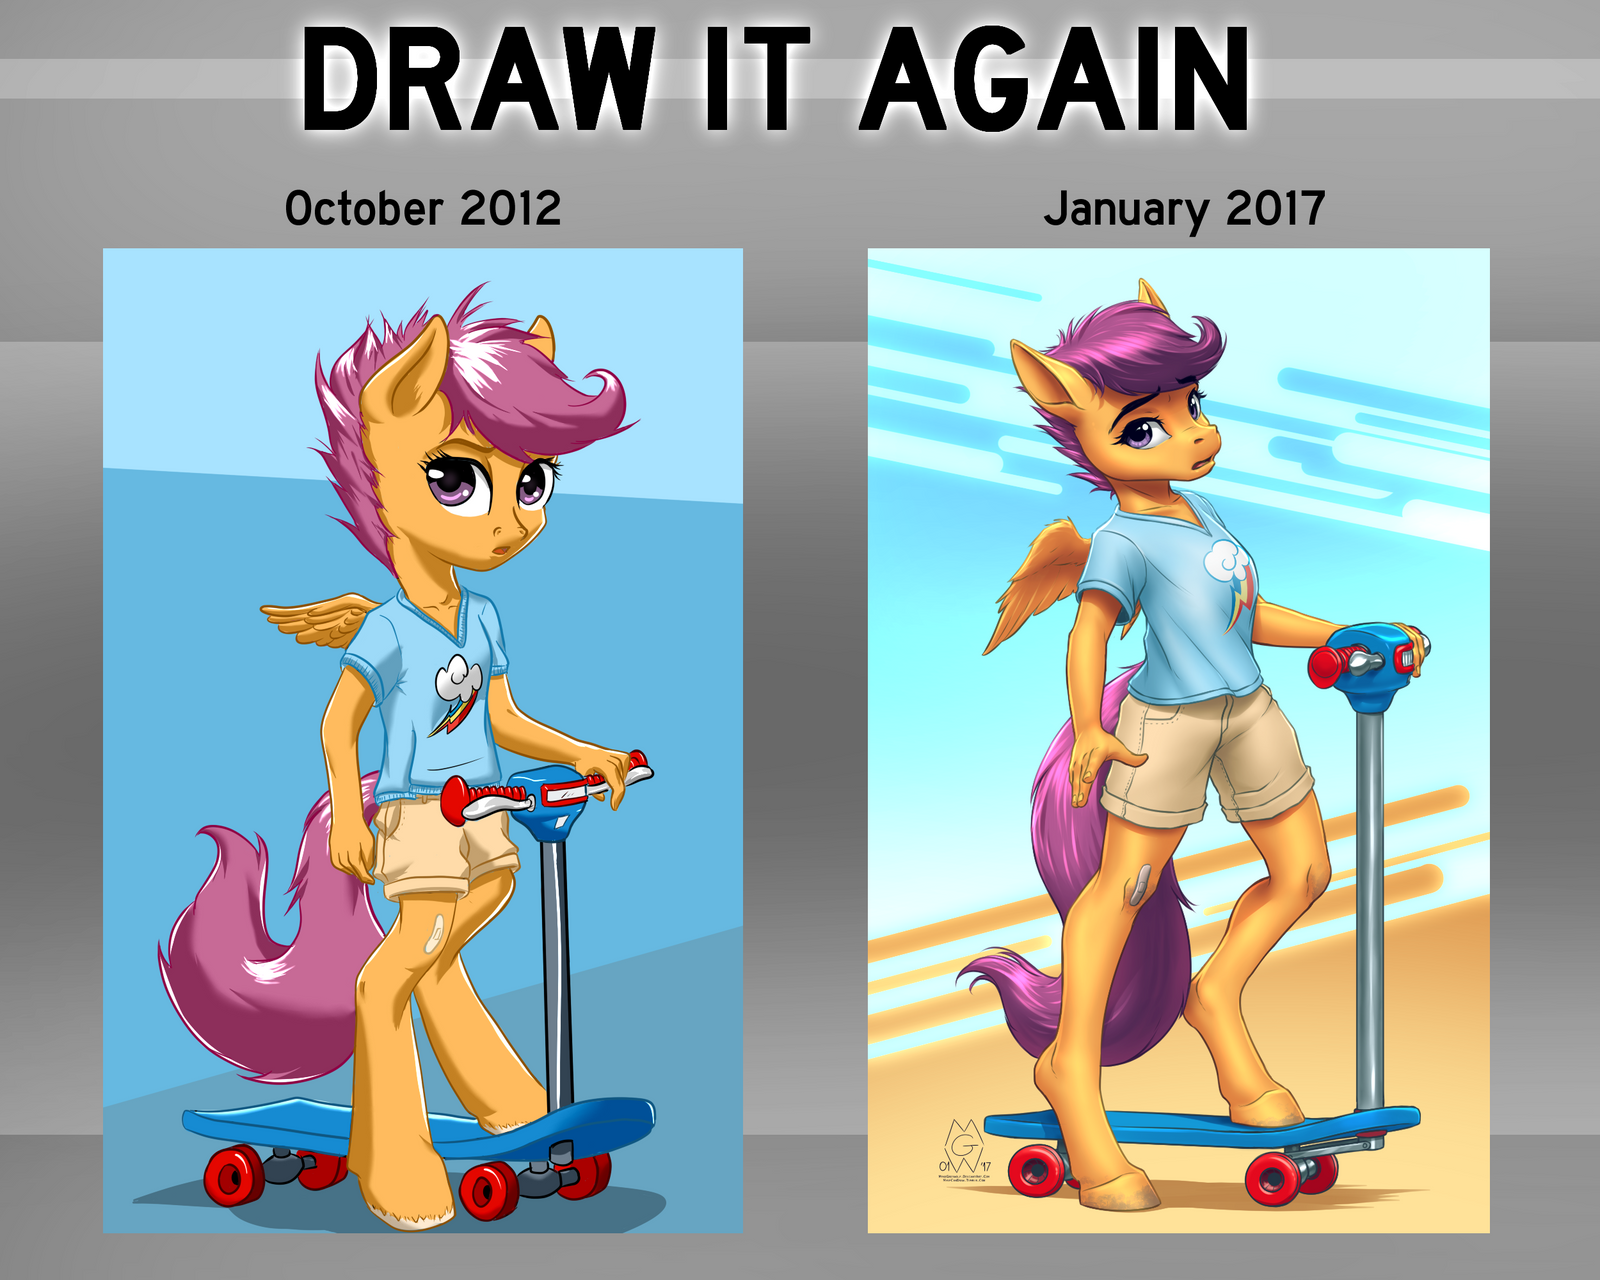 scootin__scootaloo__side_by_side_comparison_by_mykegreywolf-dauzwg7.png